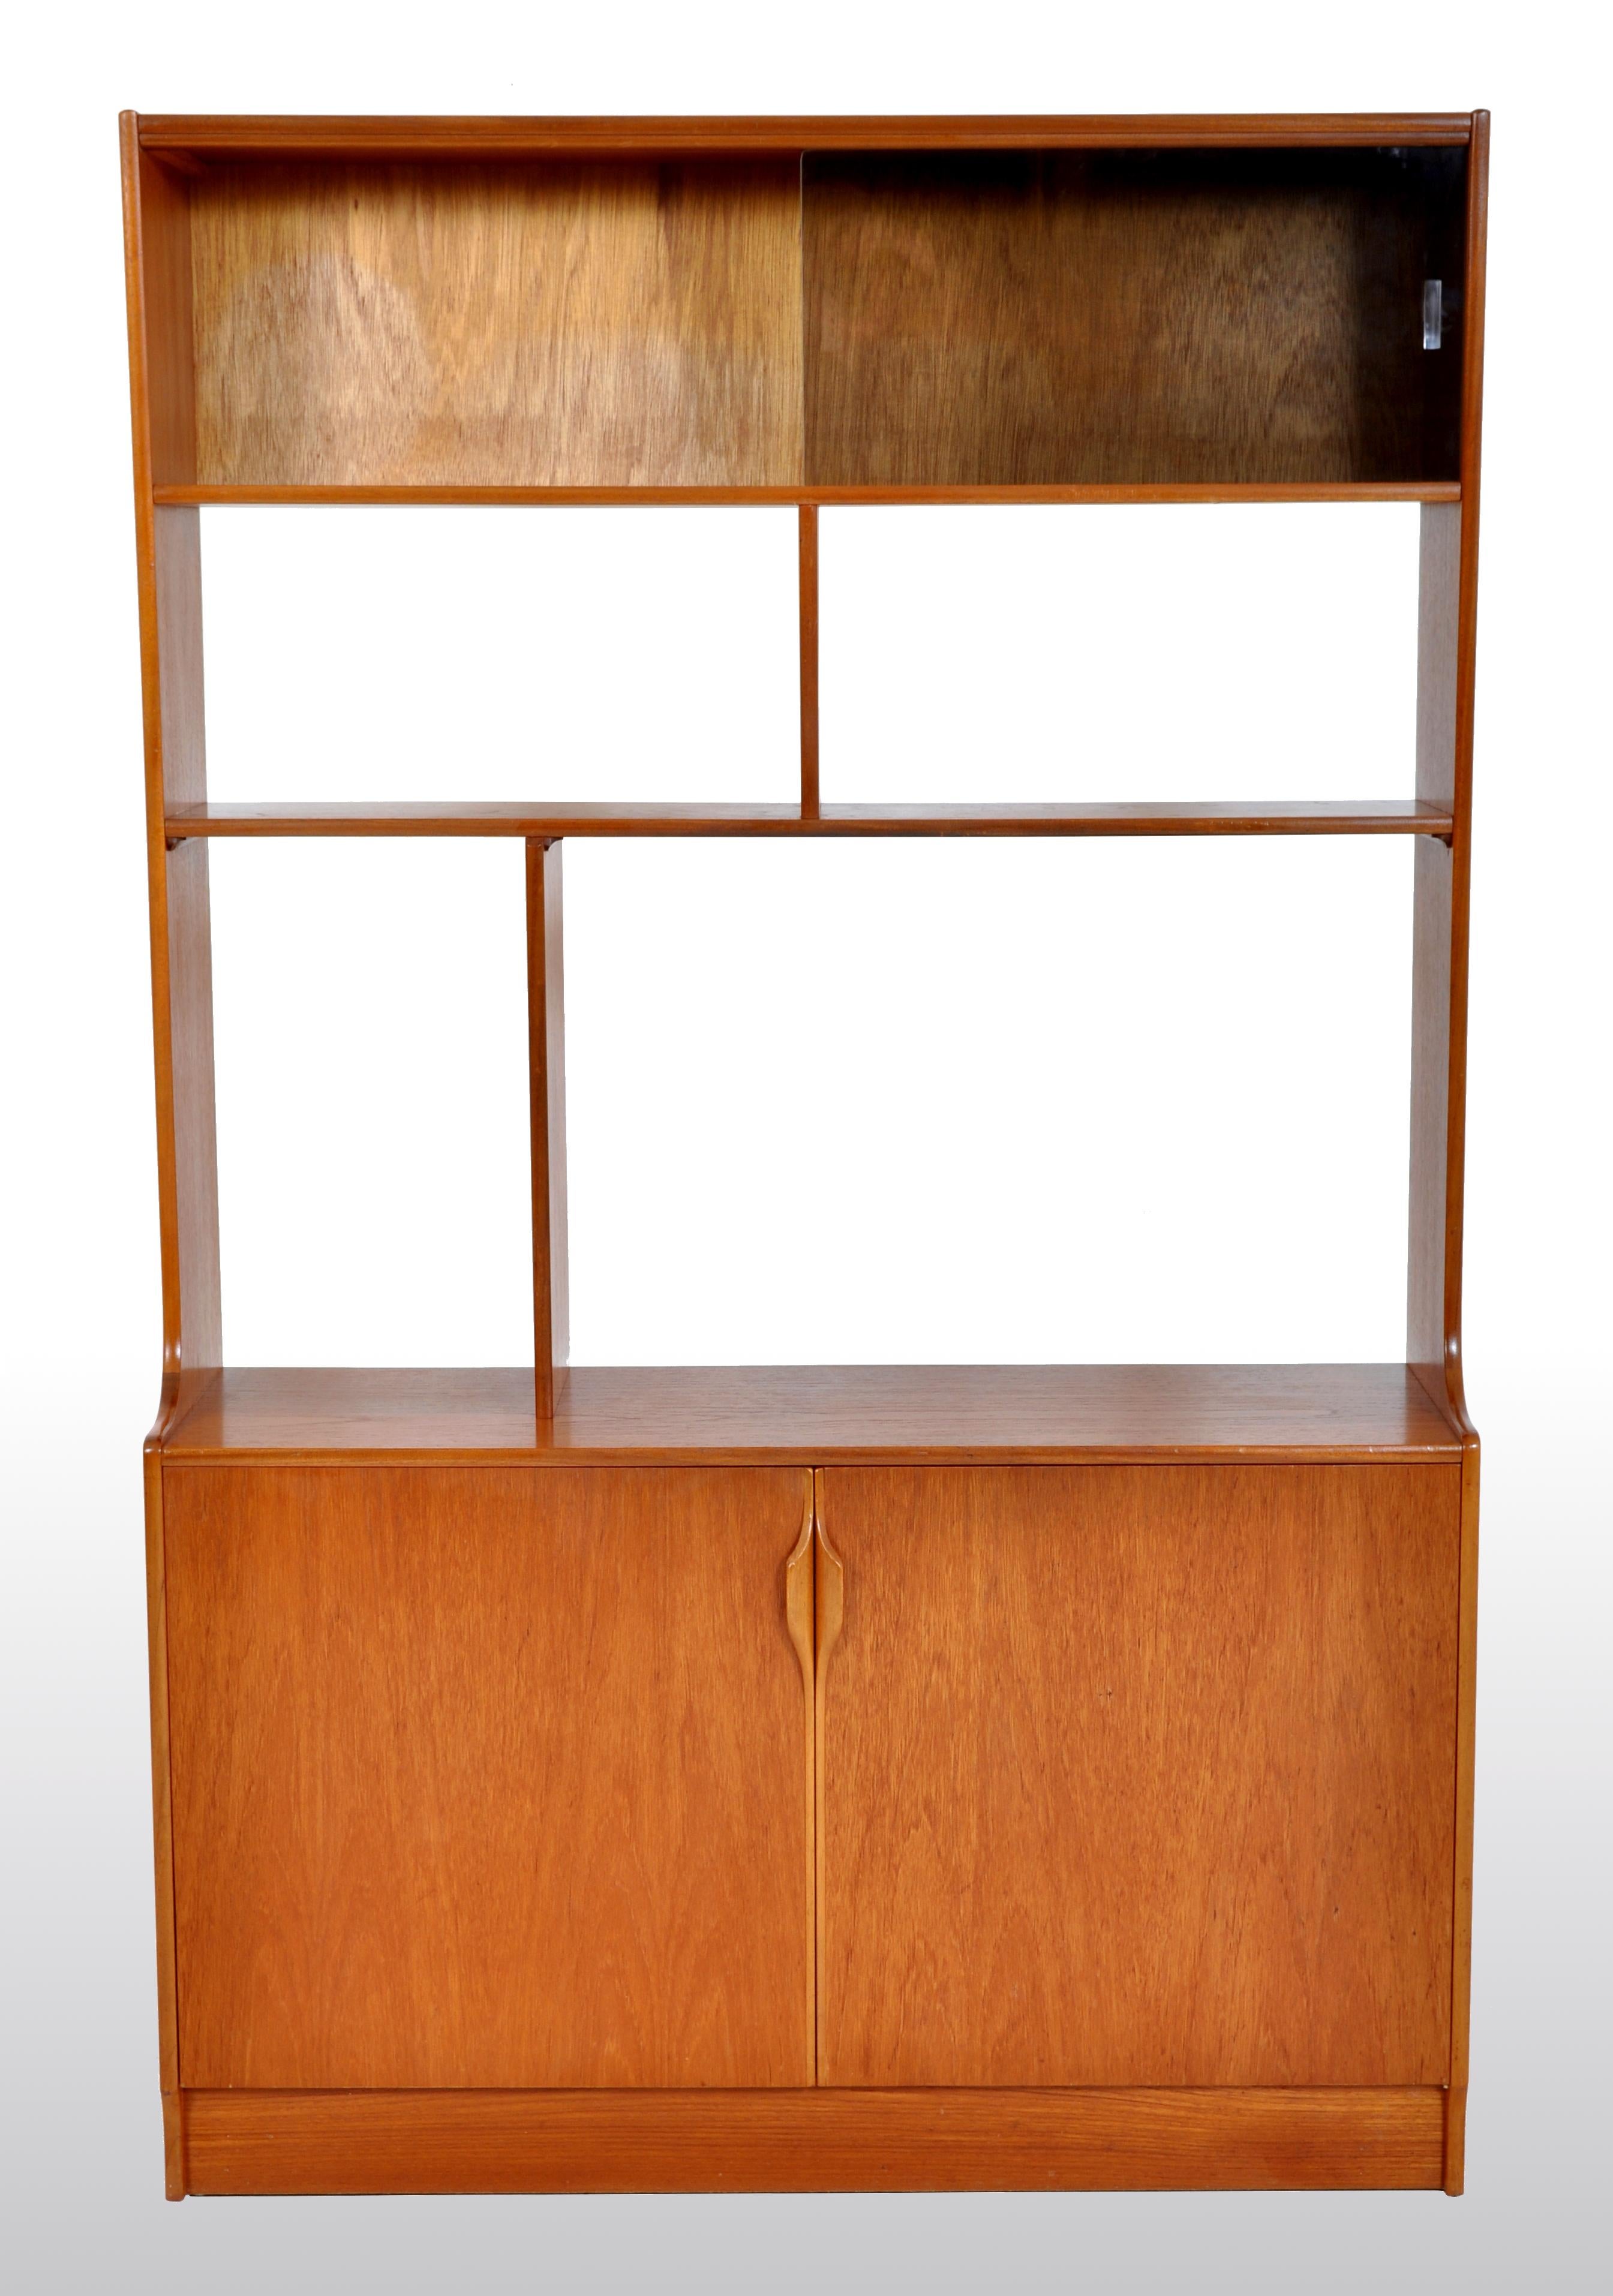 English Mid-Century Modern Danish Style Bookcase / Wall Unit / in Teak by S Form, 1960s